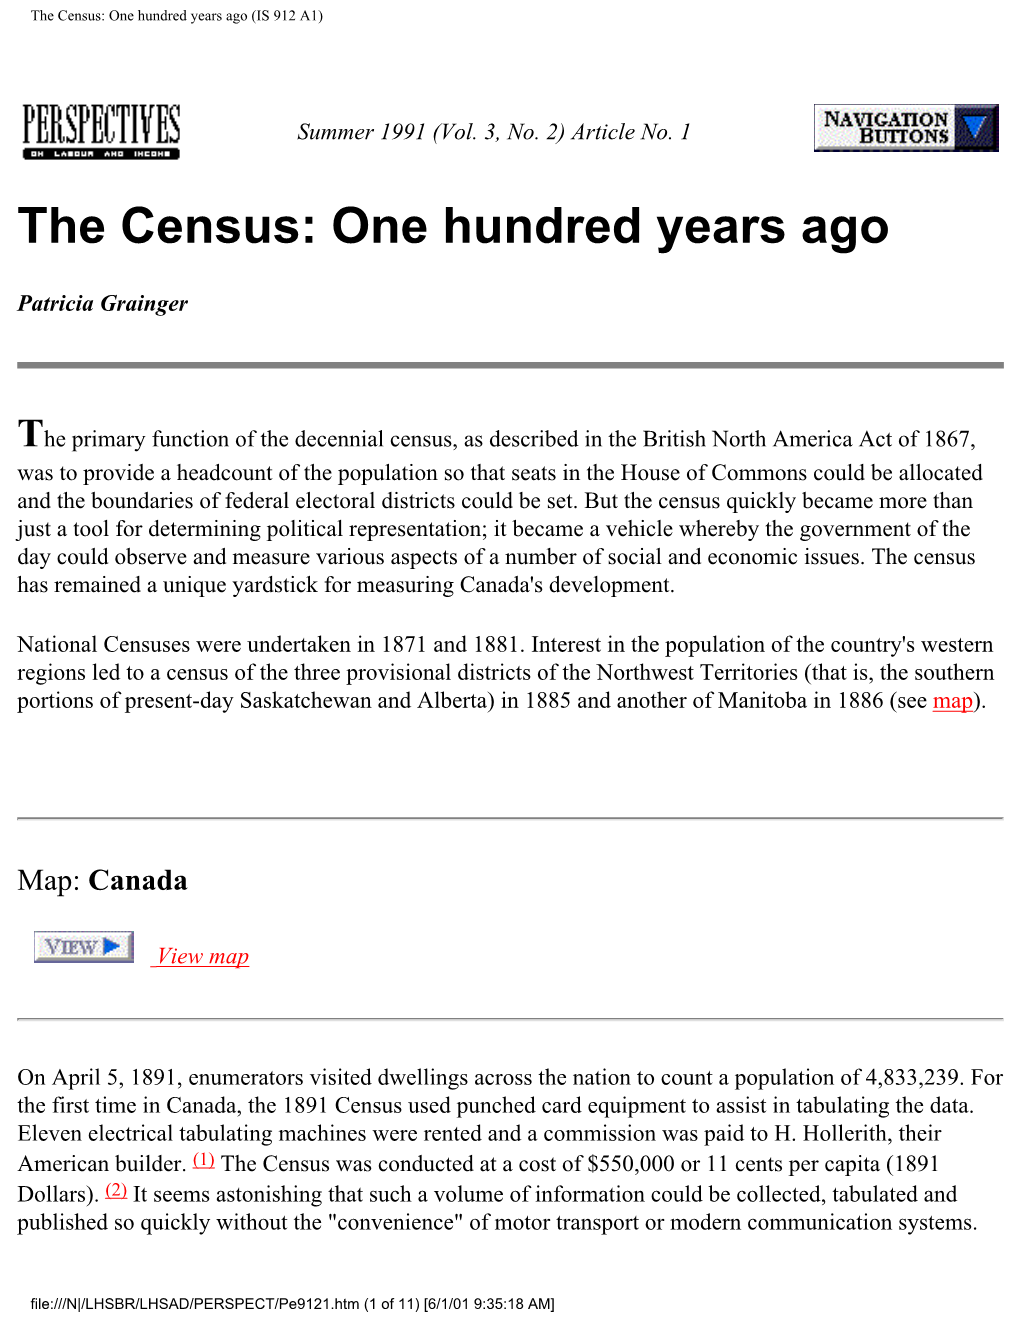 The Census: One Hundred Years Ago (IS 912 A1)